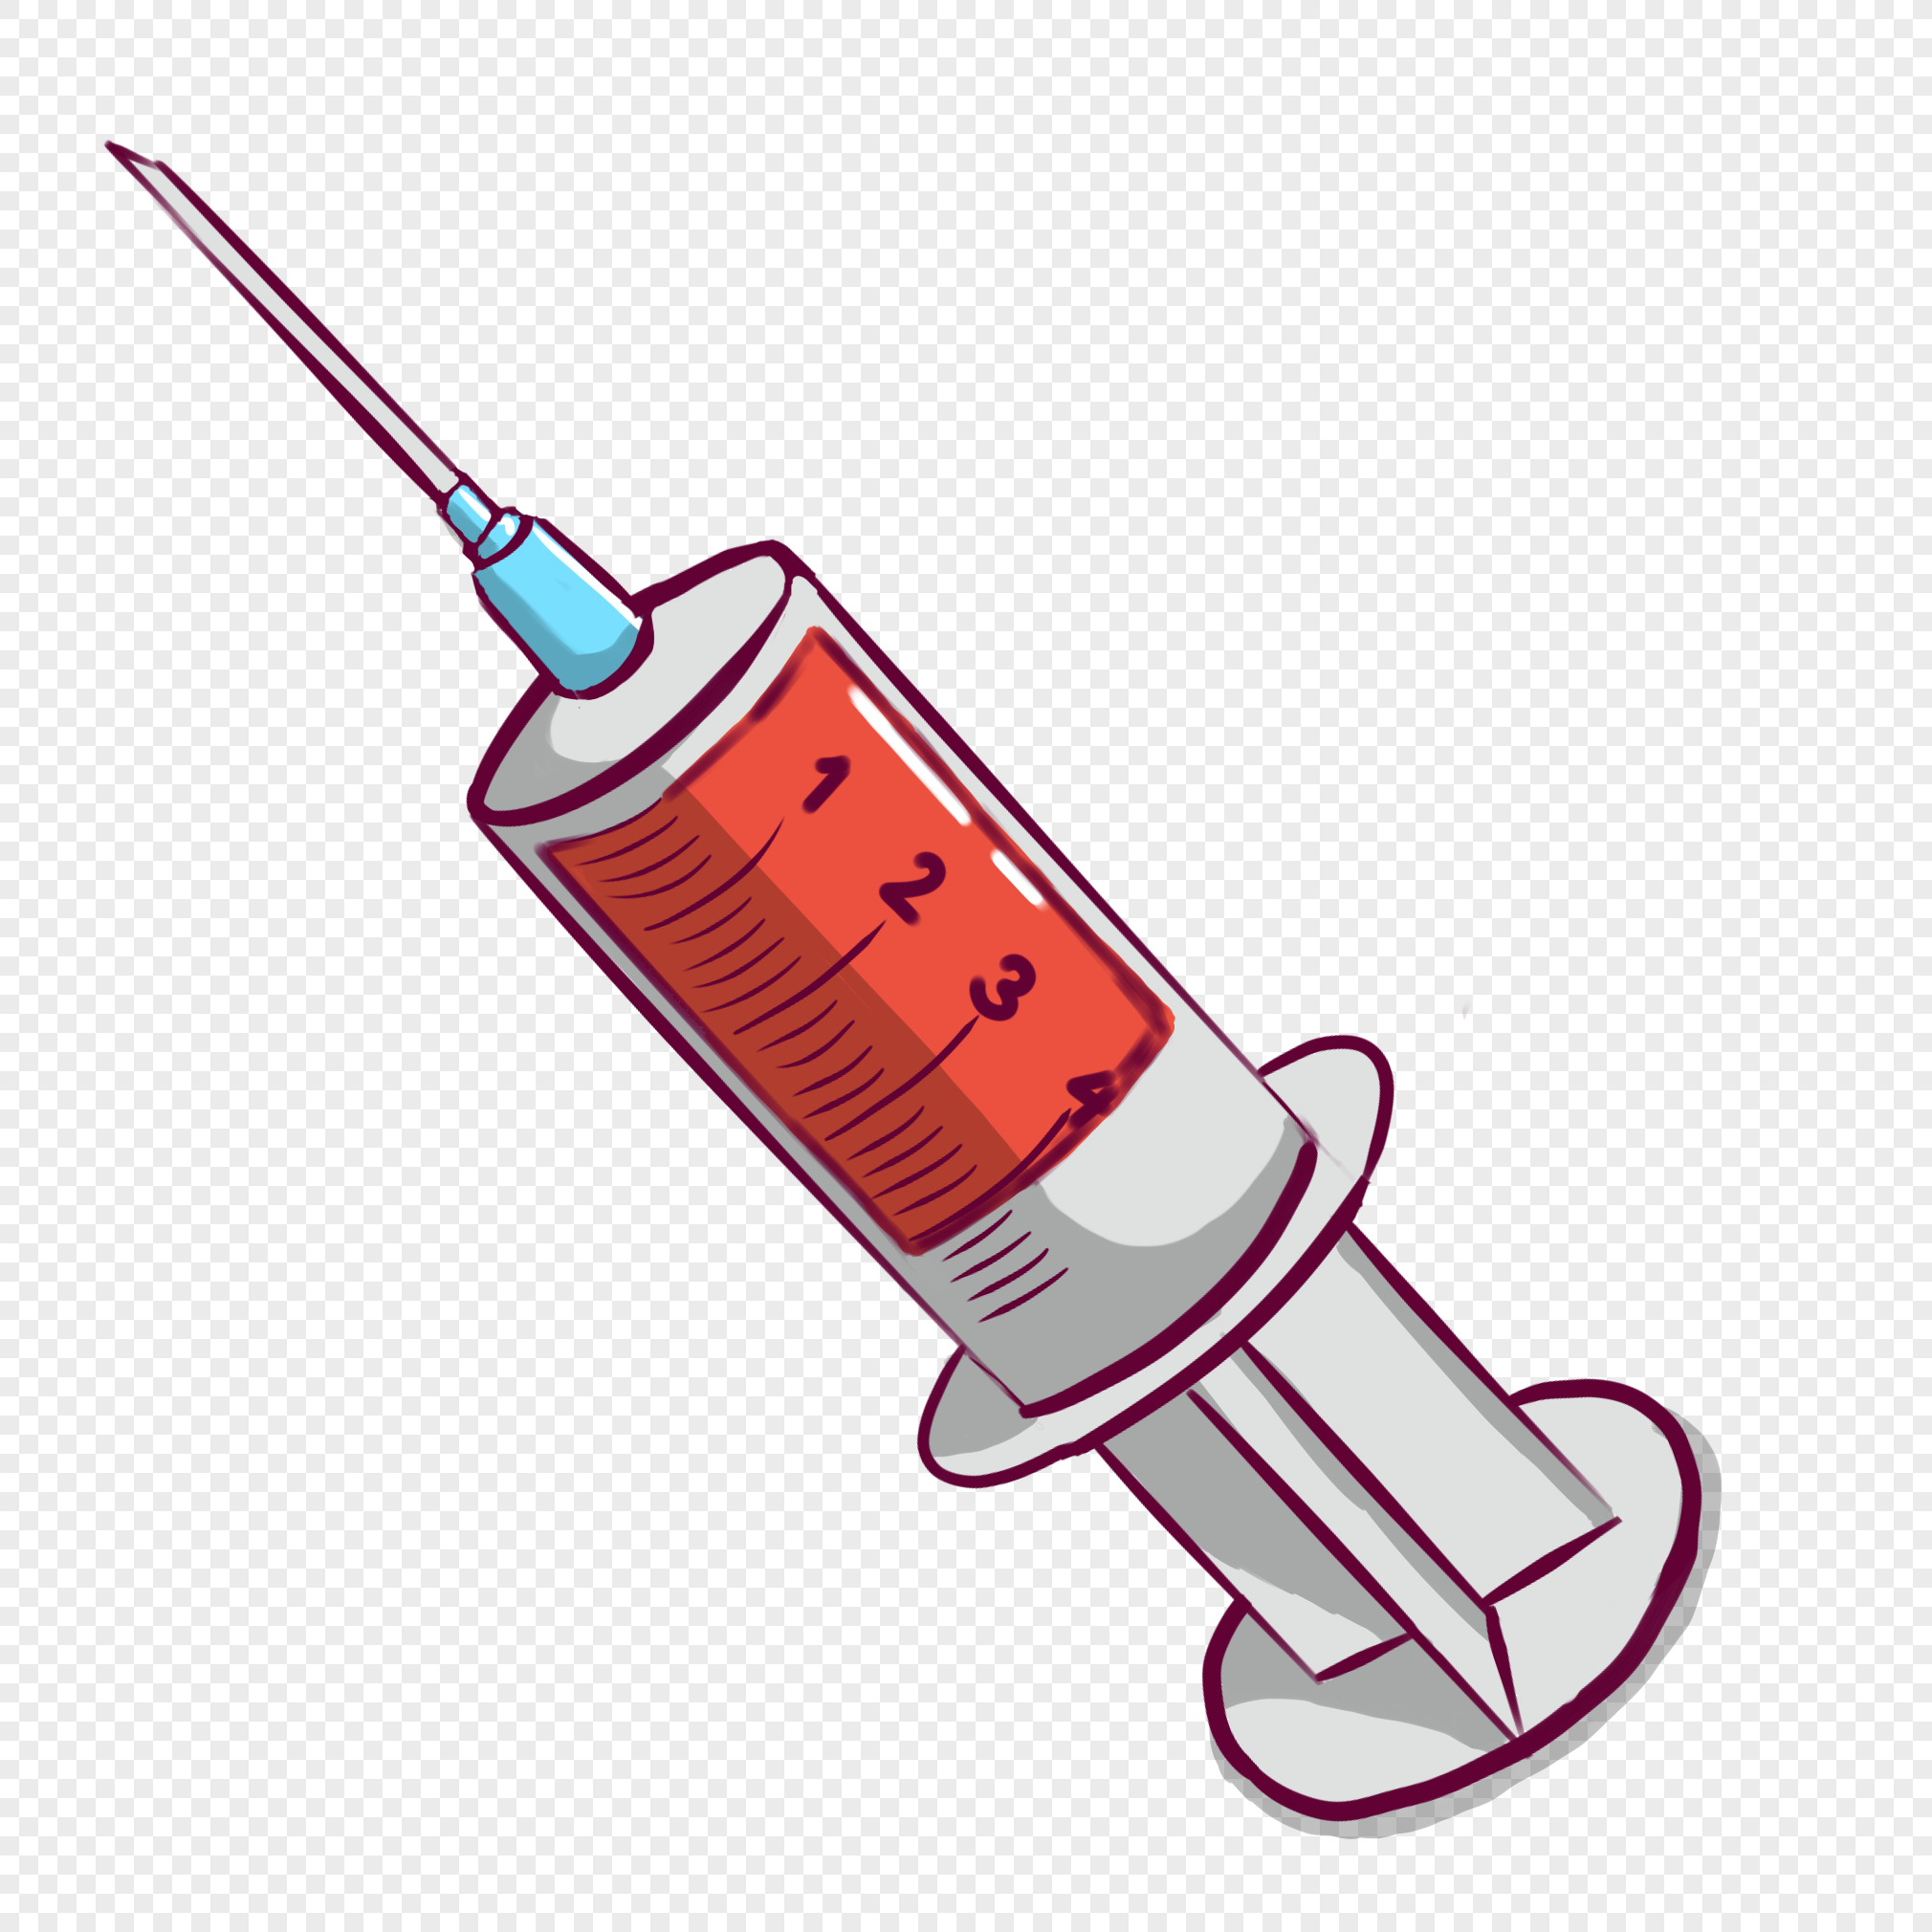 Needle png image_picture free download 401385541_lovepik.com